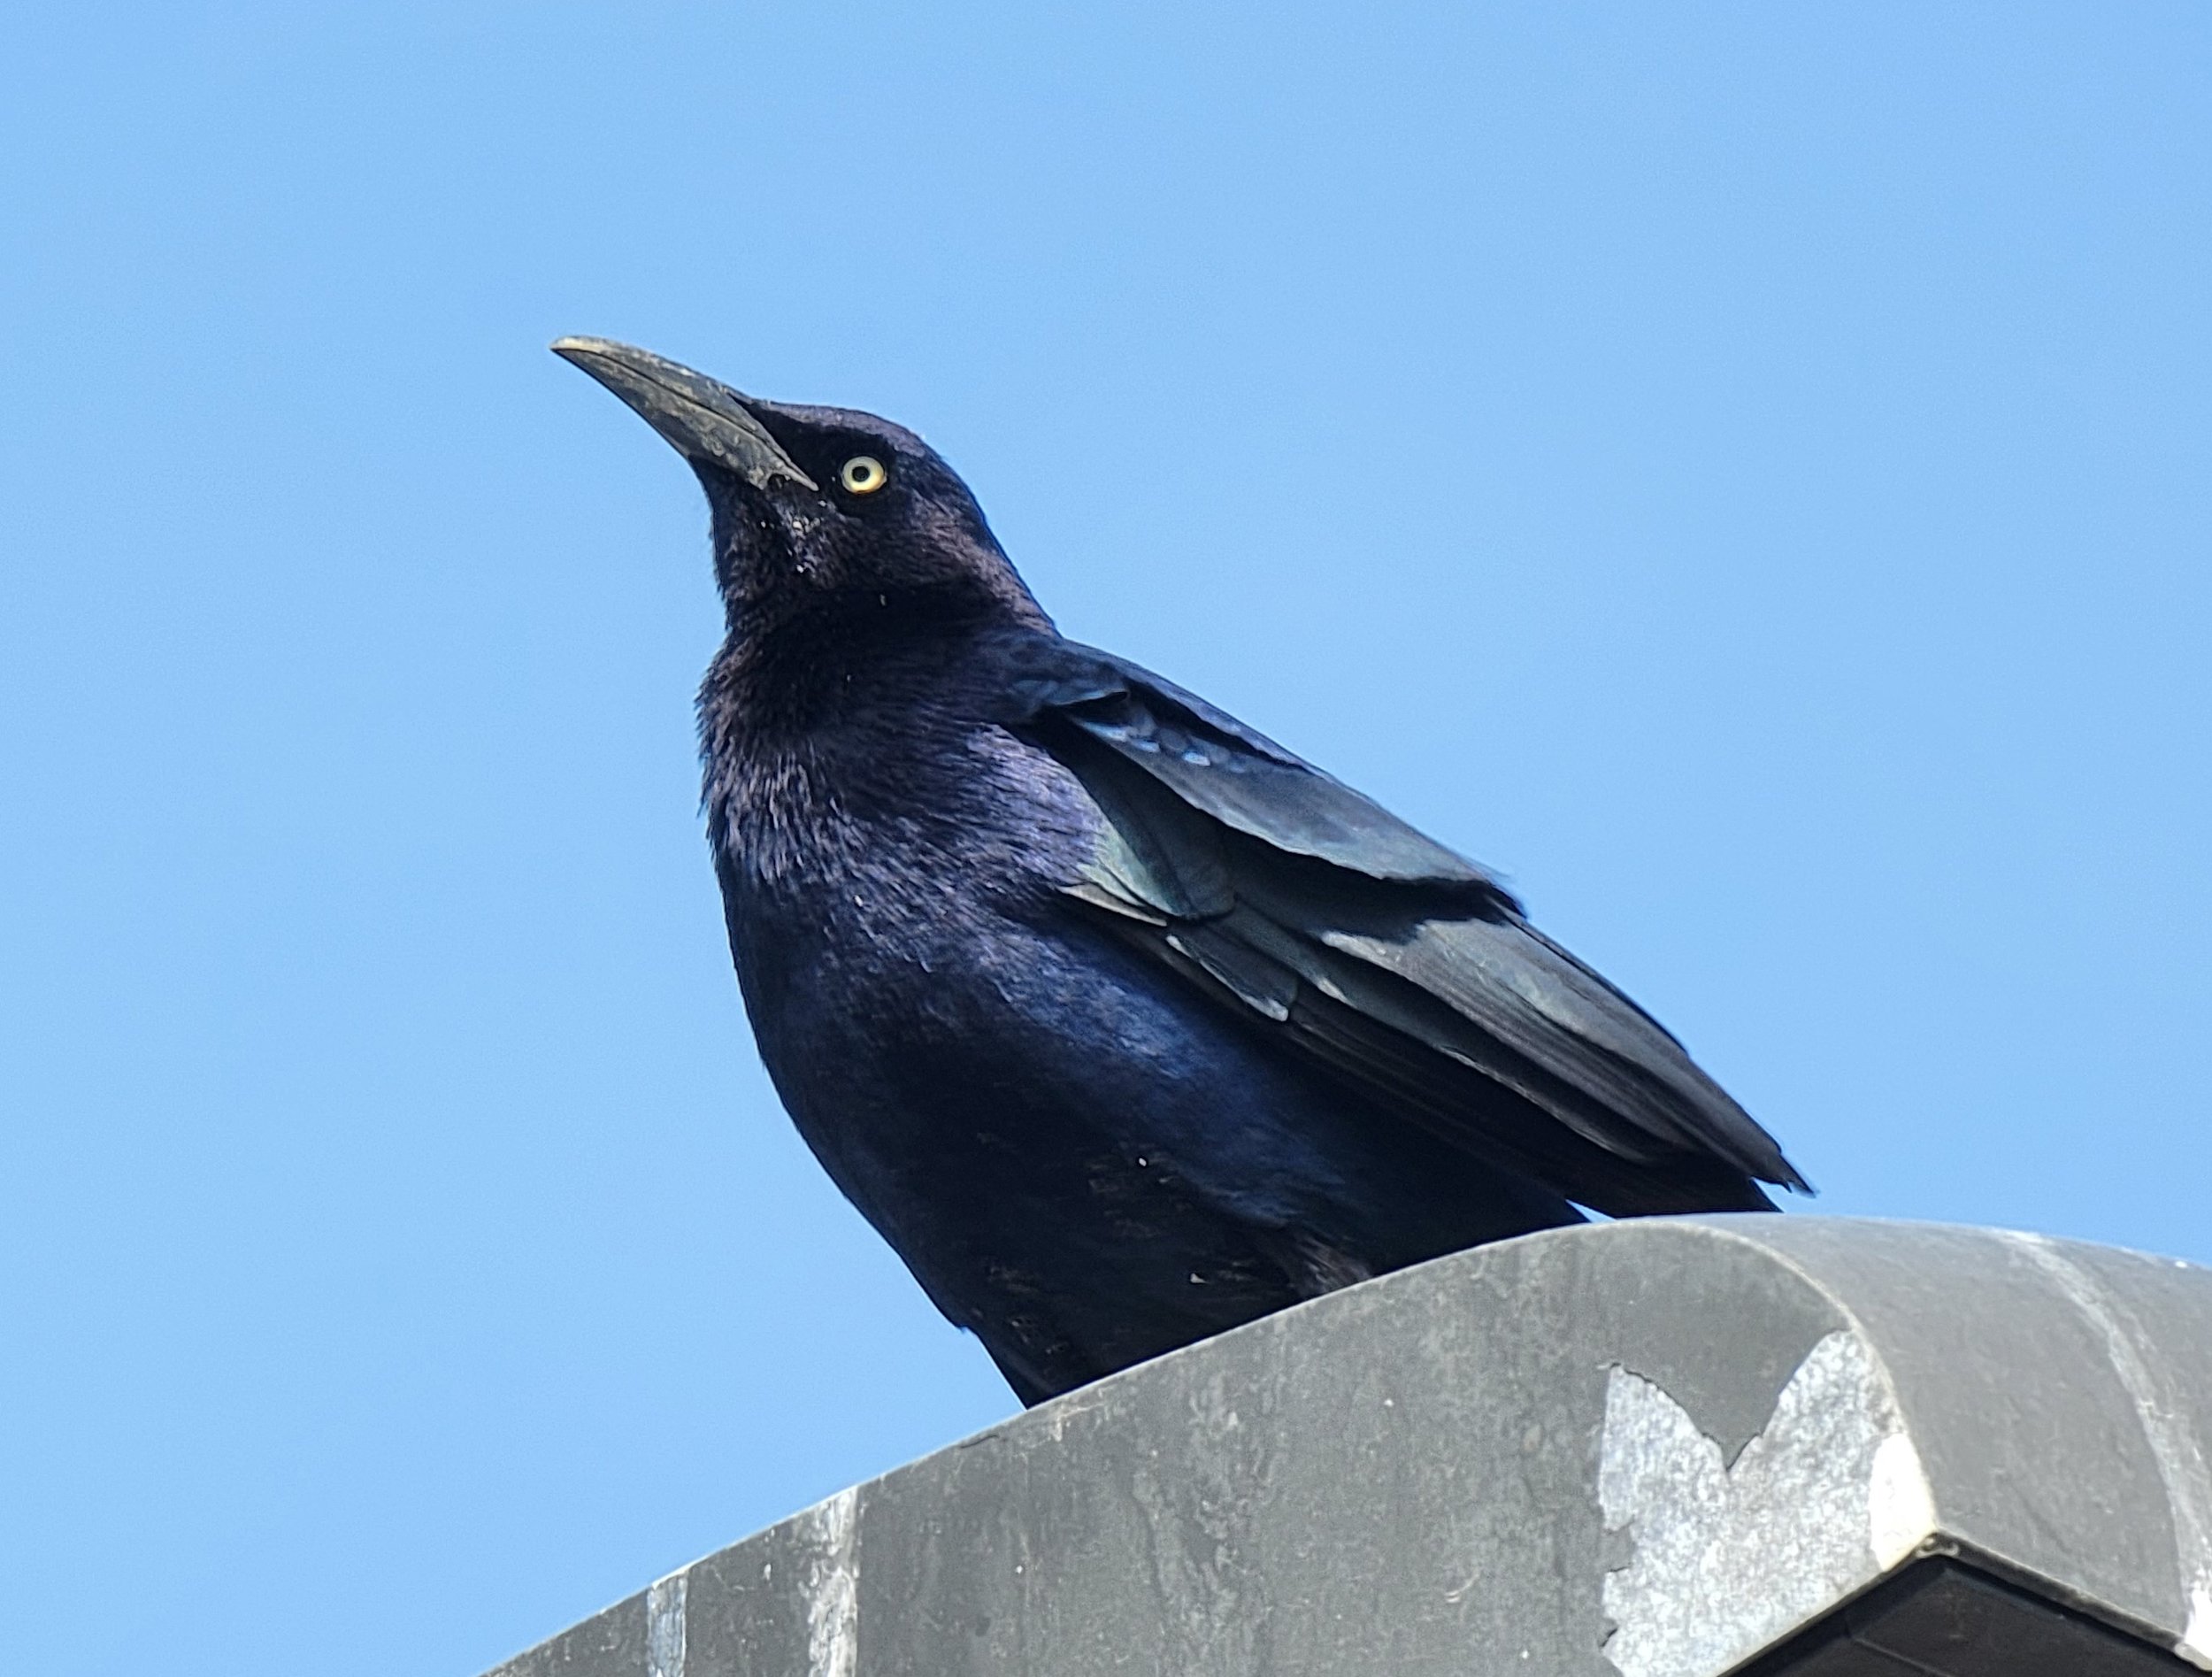 A Great-Tailed Grackle watching me from a lamp post. Some birds are smart enough to know humans can't fly so they don't panic when they see you walking 20 feet below. 